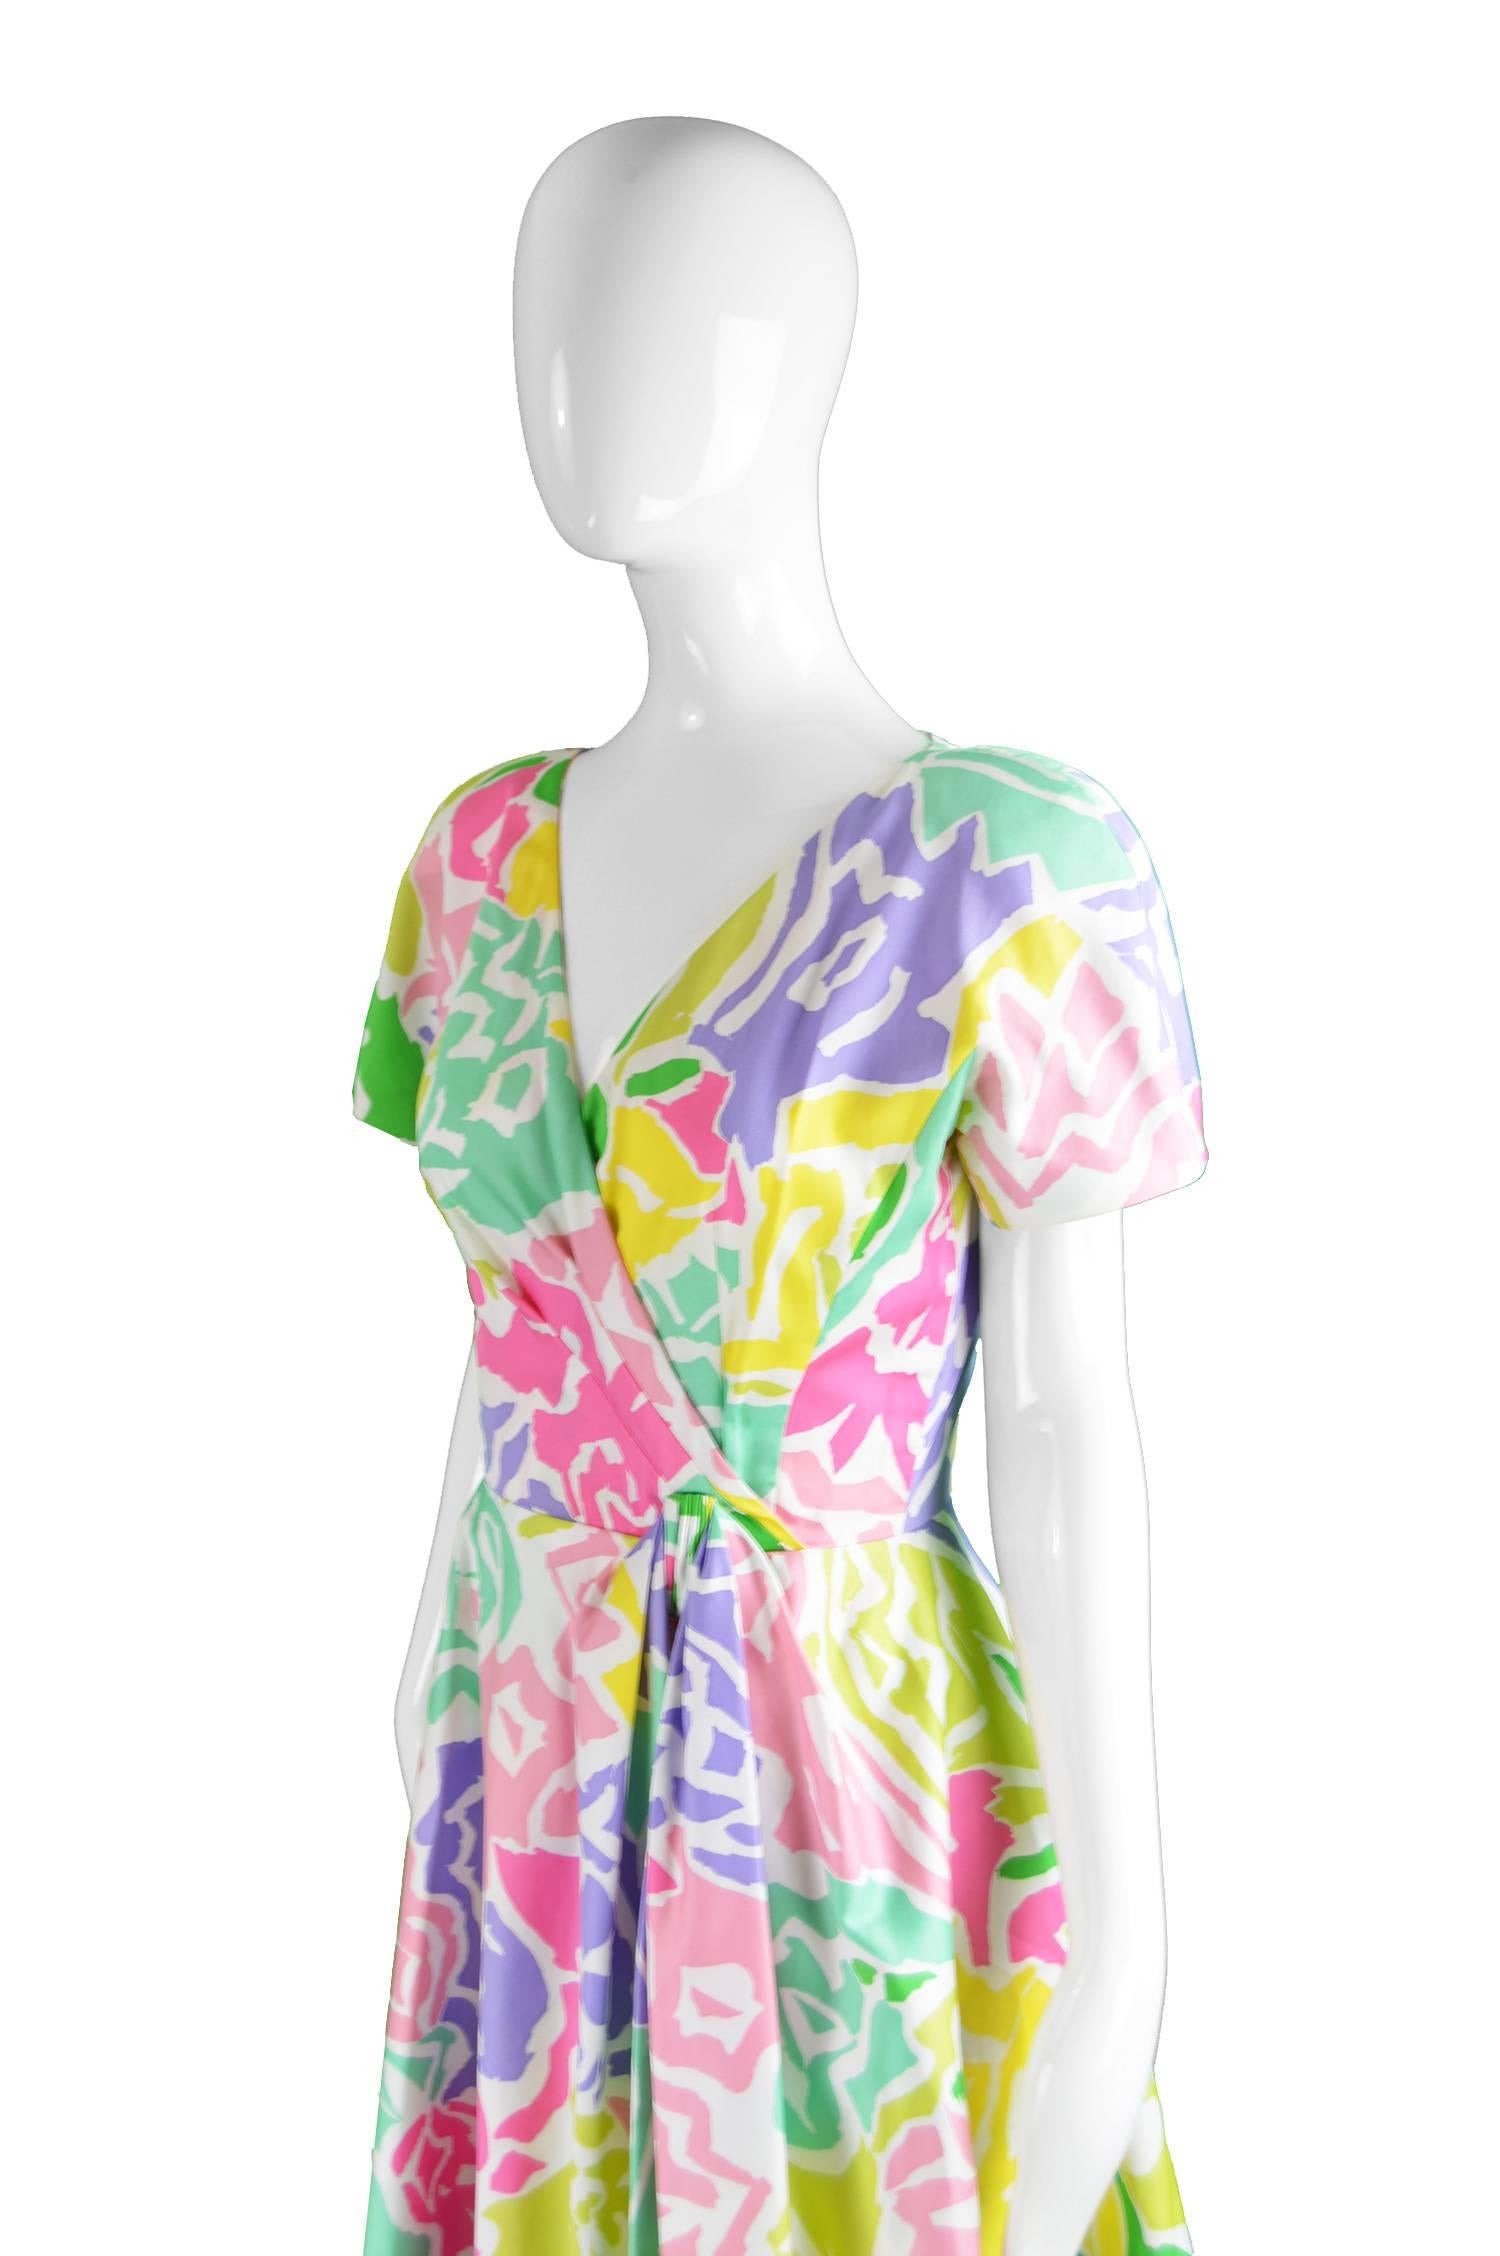 Guy Laroche Vintage Multicolored Cotton Peplum Flared Dress, 1980s In Excellent Condition For Sale In Doncaster, South Yorkshire